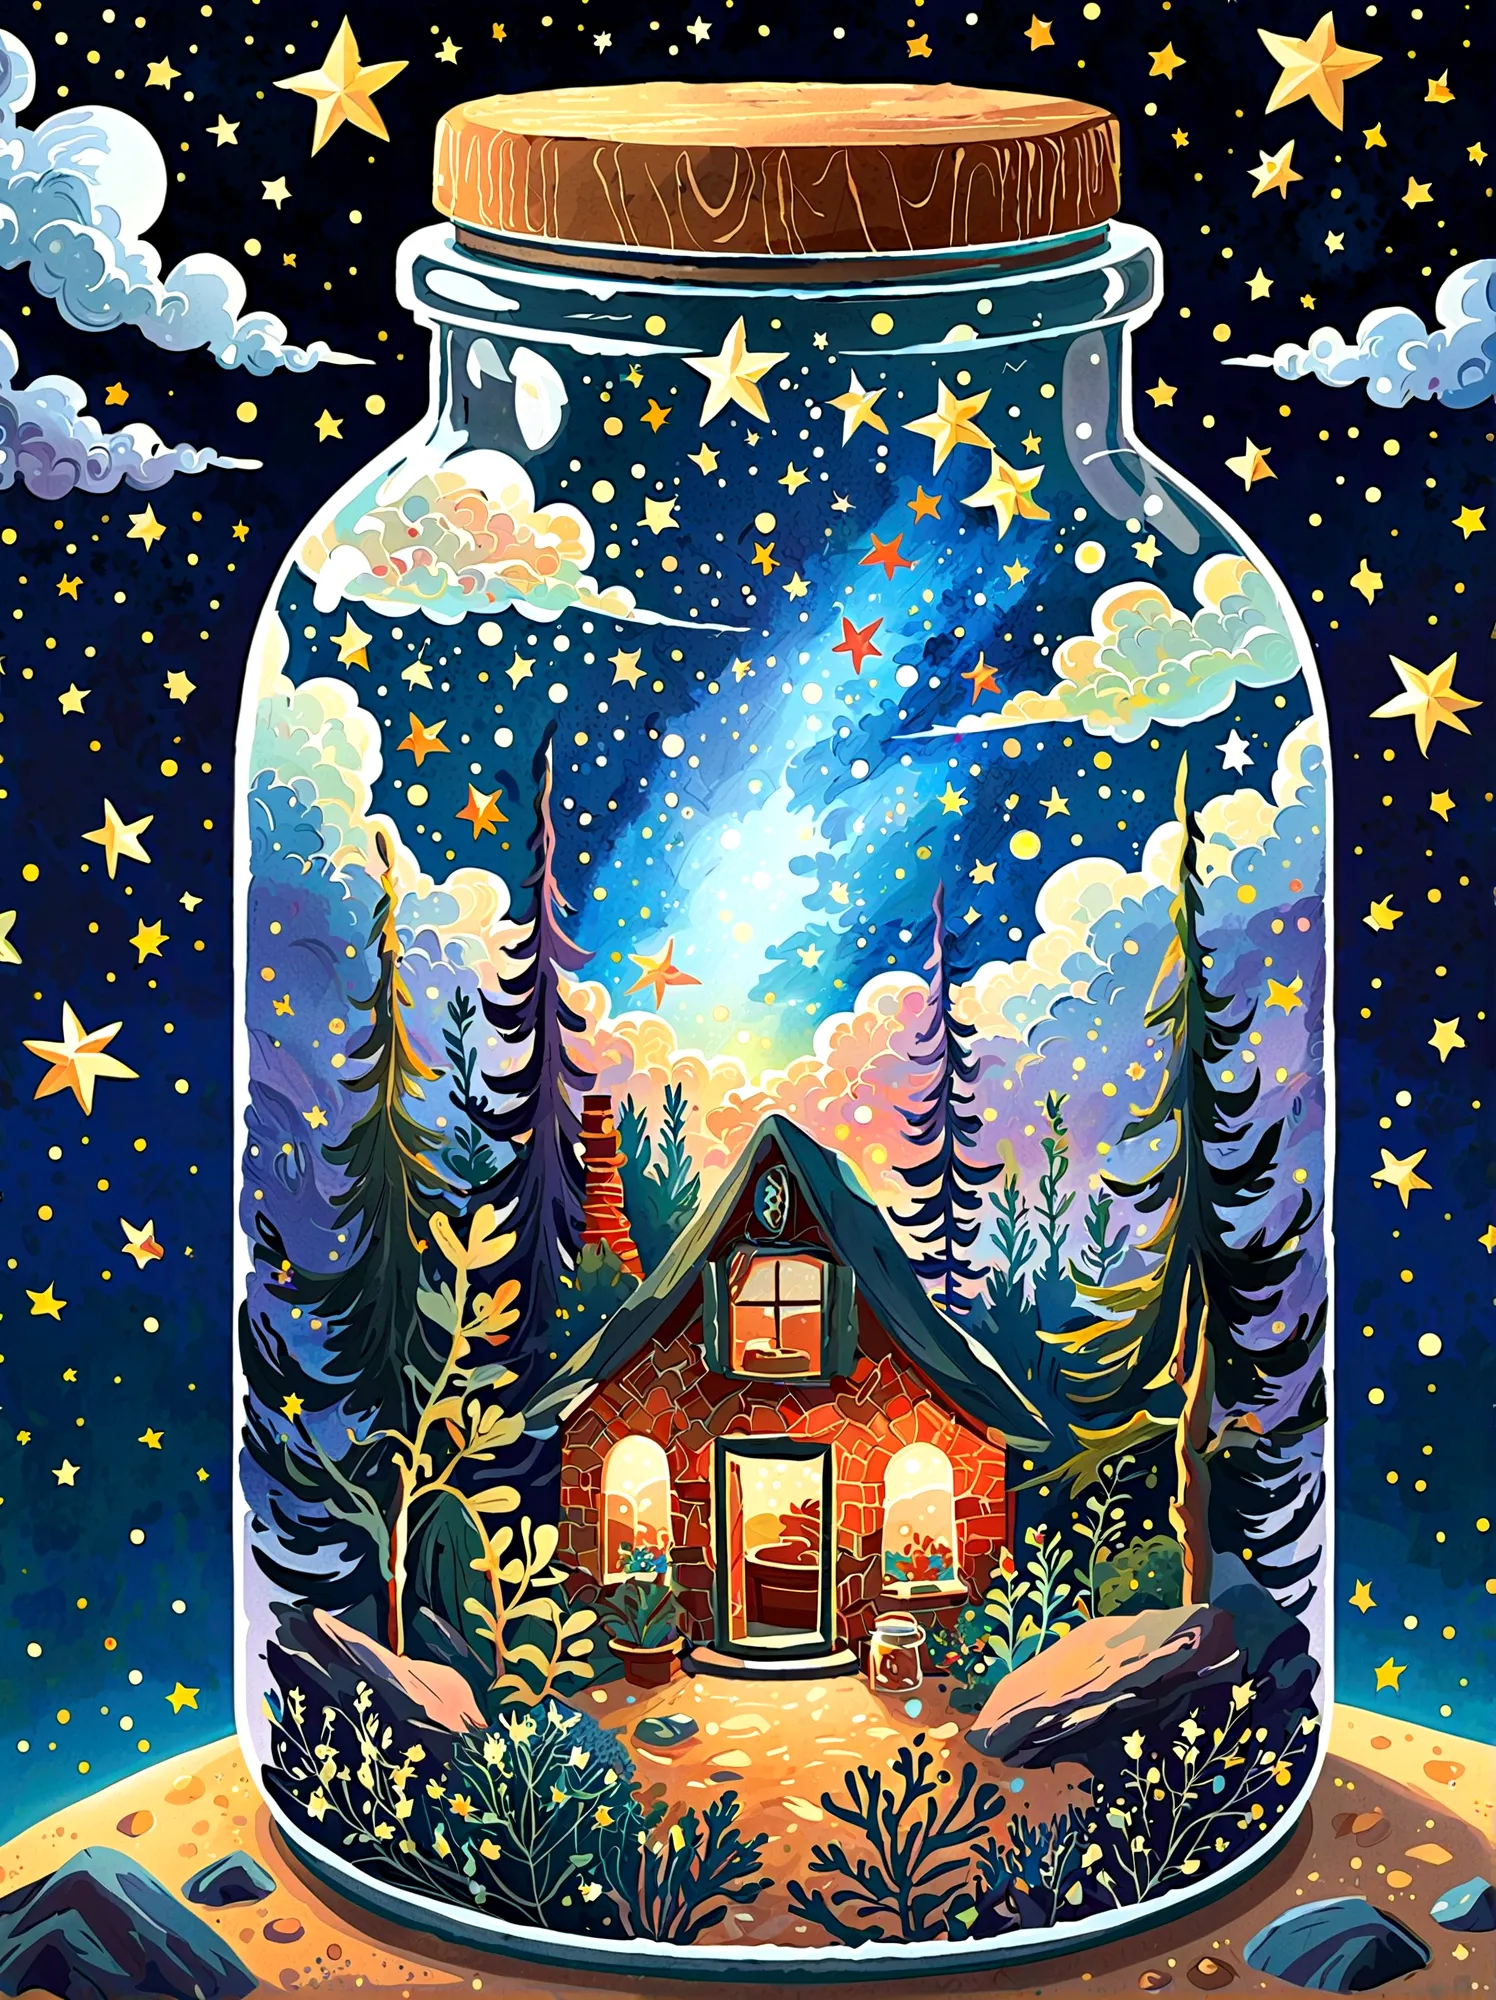 pzsj1, Masterpiece，Top quality，(Very delicate and beautiful starry sky scenery trapped in a jar), world masterpiece theater, Hig...